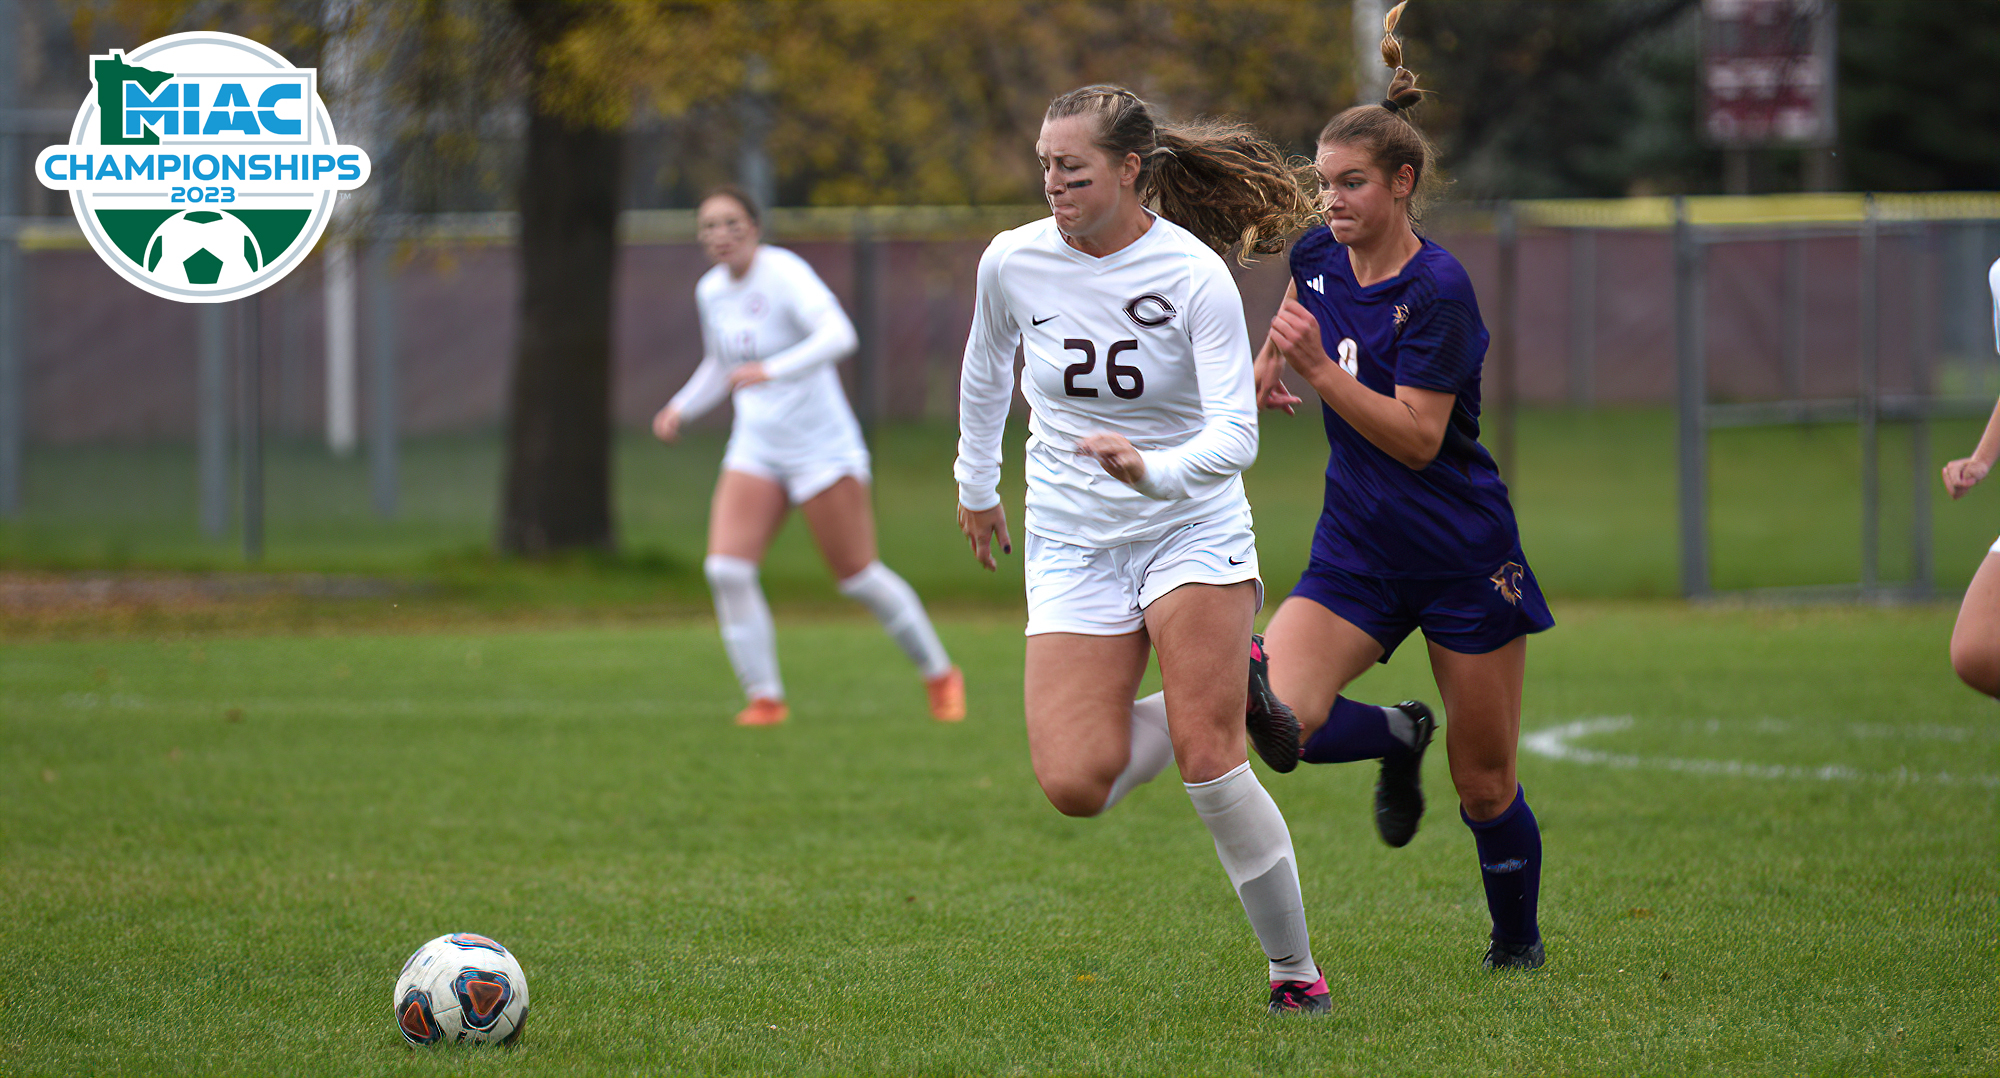 Concordia gave up a pair of goals in a 6 minute span around the halftime break and lost 2-0 at St. Catherine 2-0 in the MIAC semfinals.